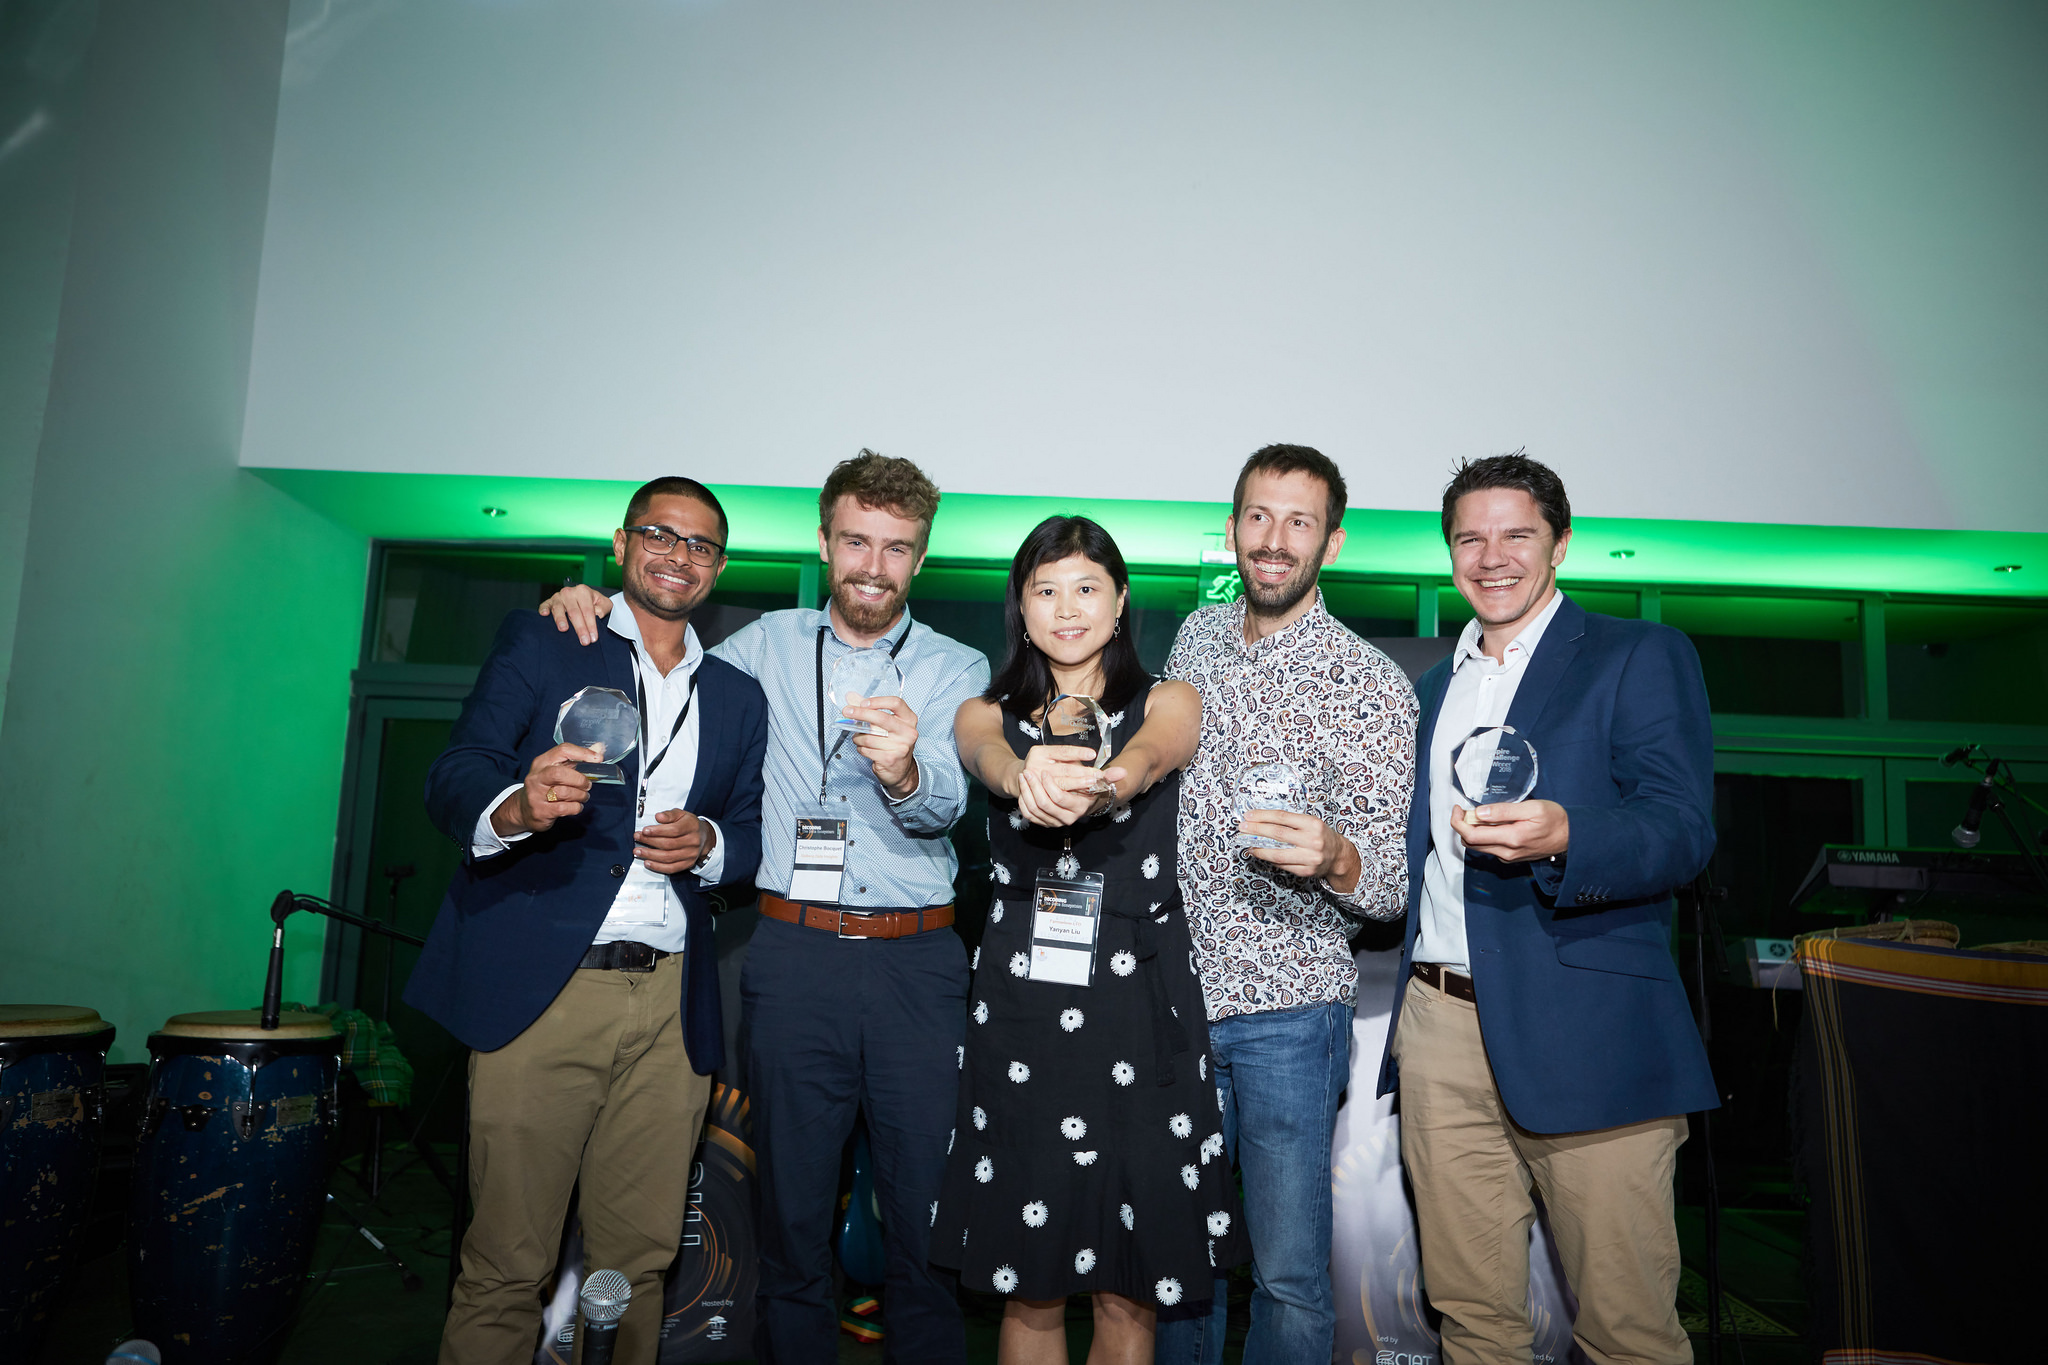 Winners of the CGIAR Big Data in Agriculture Convention's 2018 Inspire Challenge. Photo by Juozas Cernius.